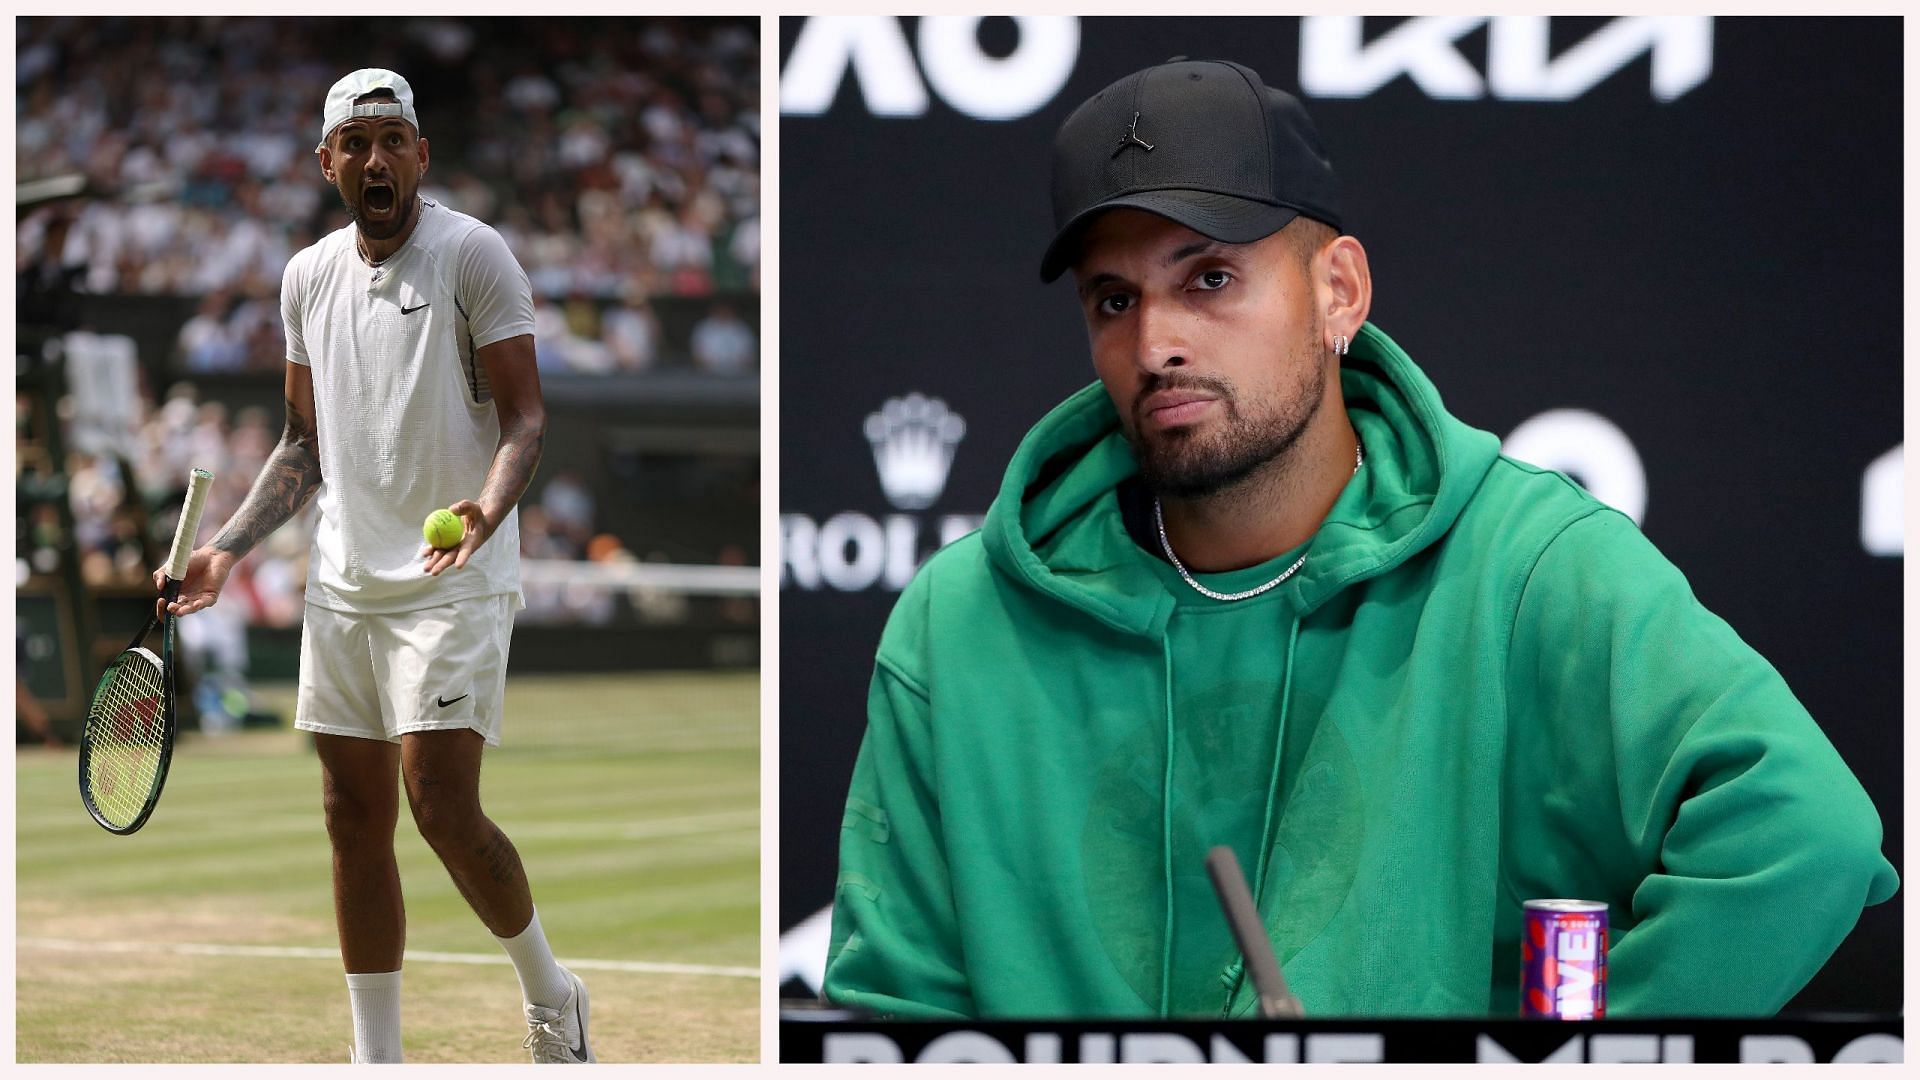 Nick Kyrgios is currently ranked ATP World No. 33.